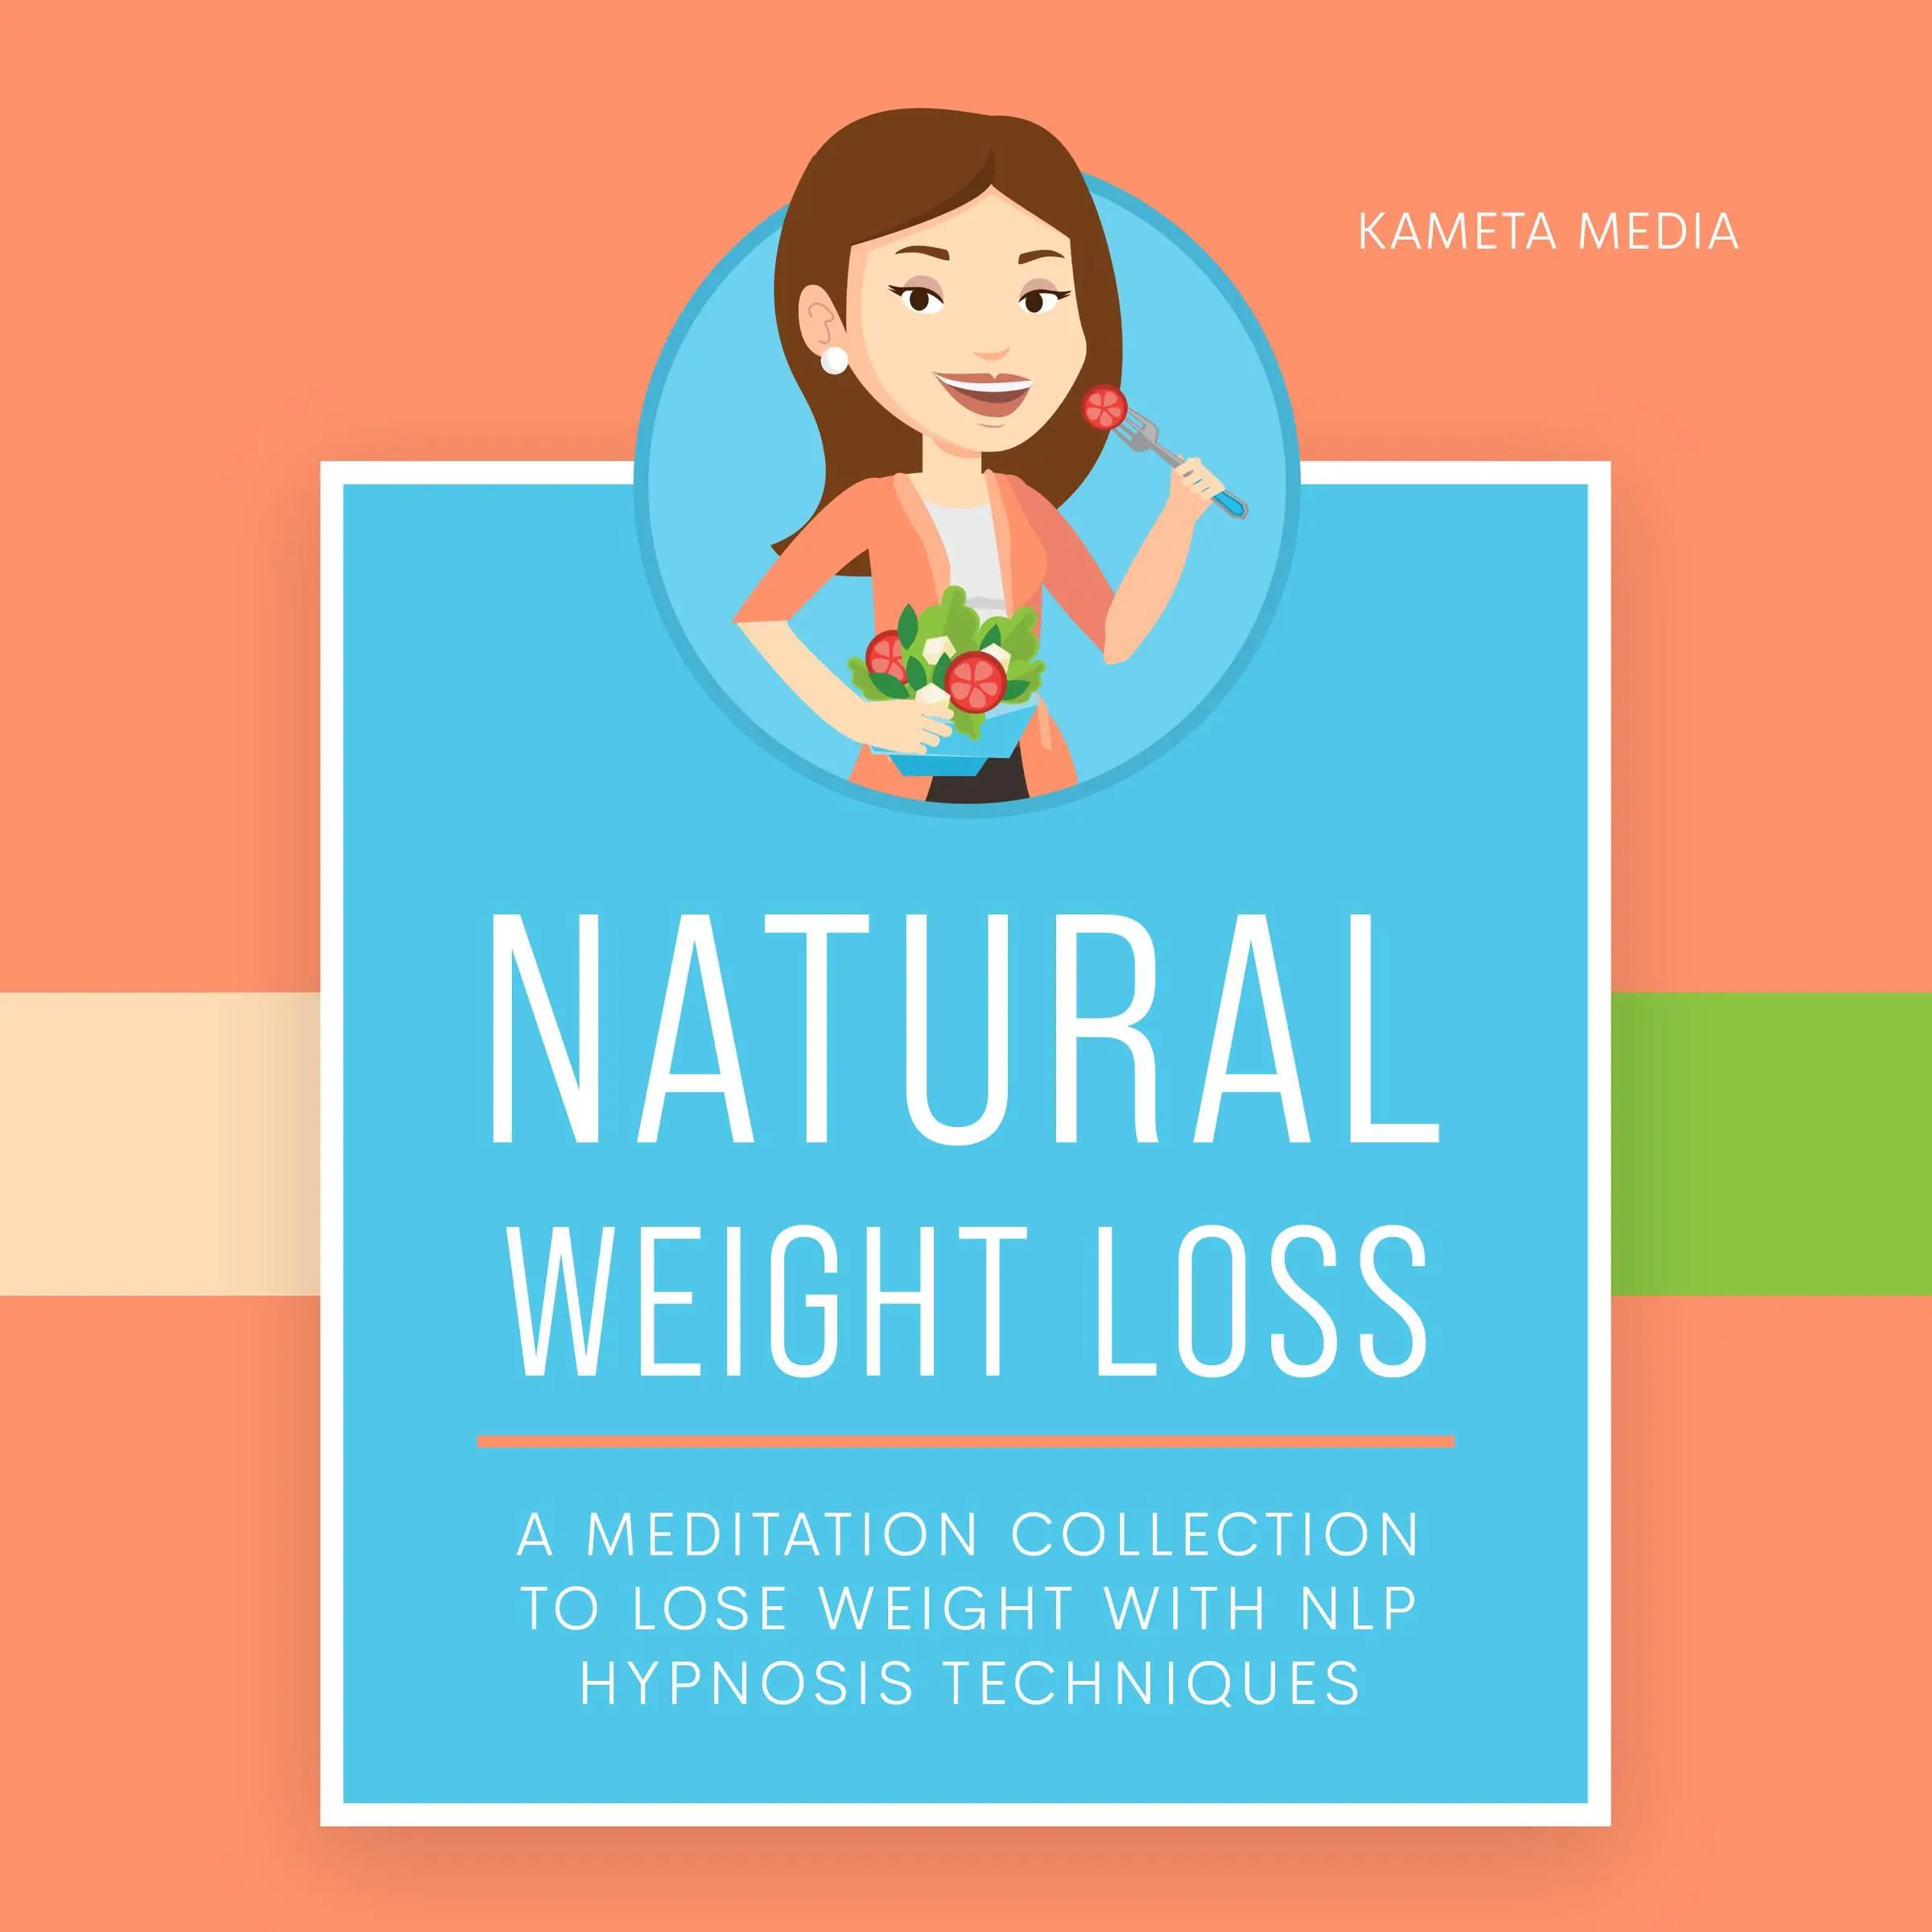 Natural Weight Loss: A Meditation Collection to Lose Weight with NLP Hypnosis Techniques Audiobook by Kameta Media